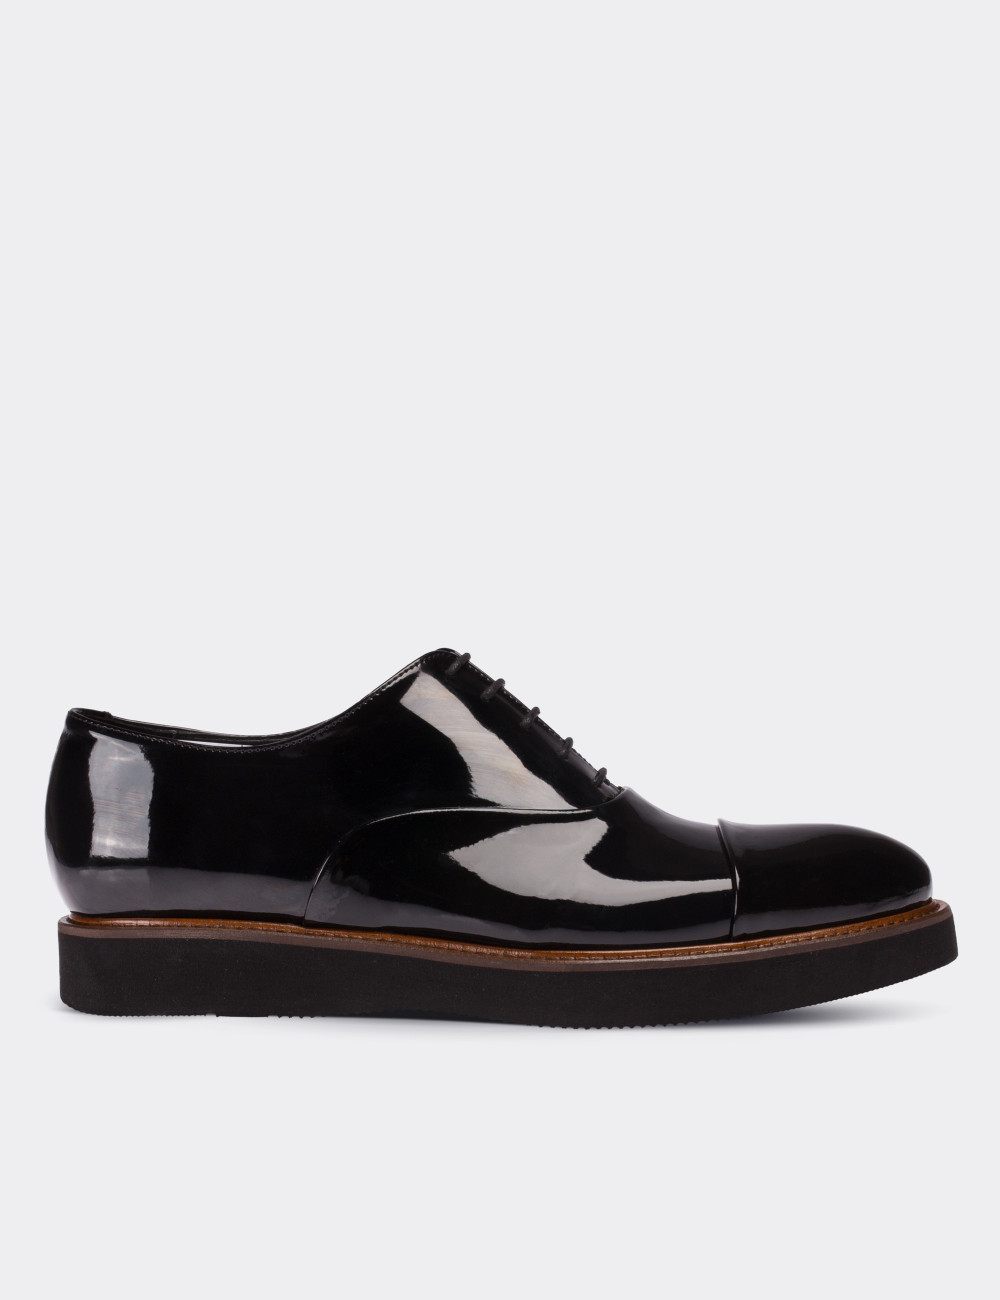 Black Patent Leather Lace-up Shoes - 01026MSYHE03